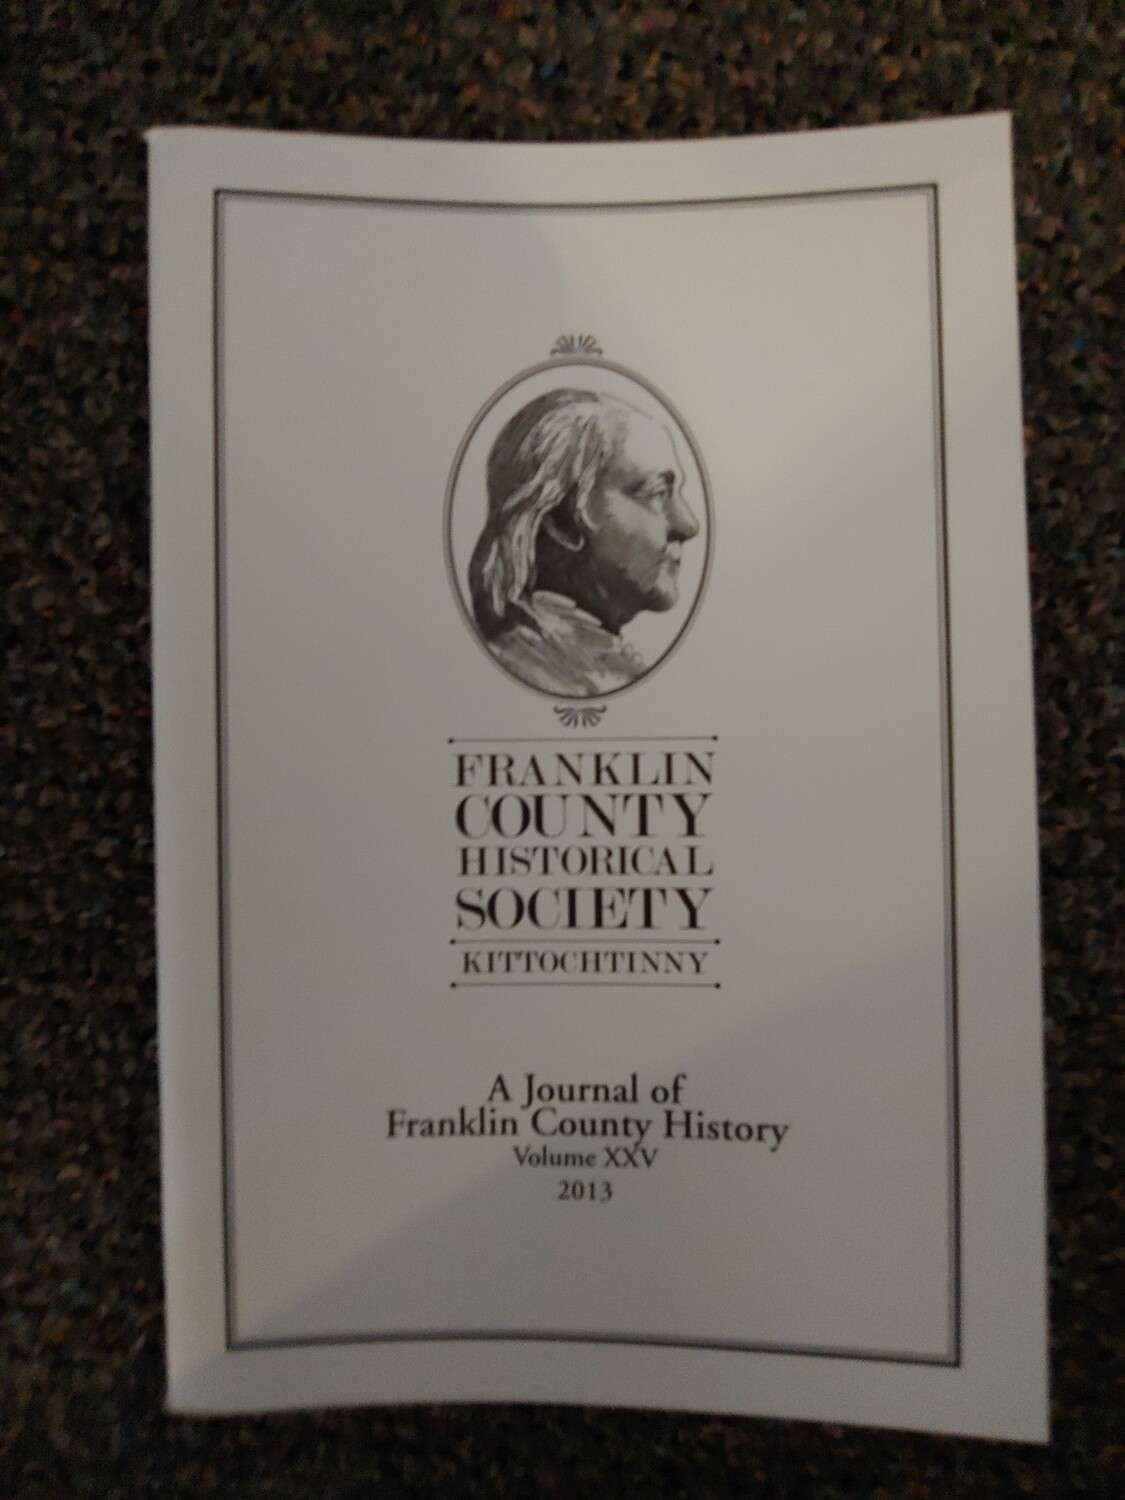 Franklin County Historical Society Journal 2013